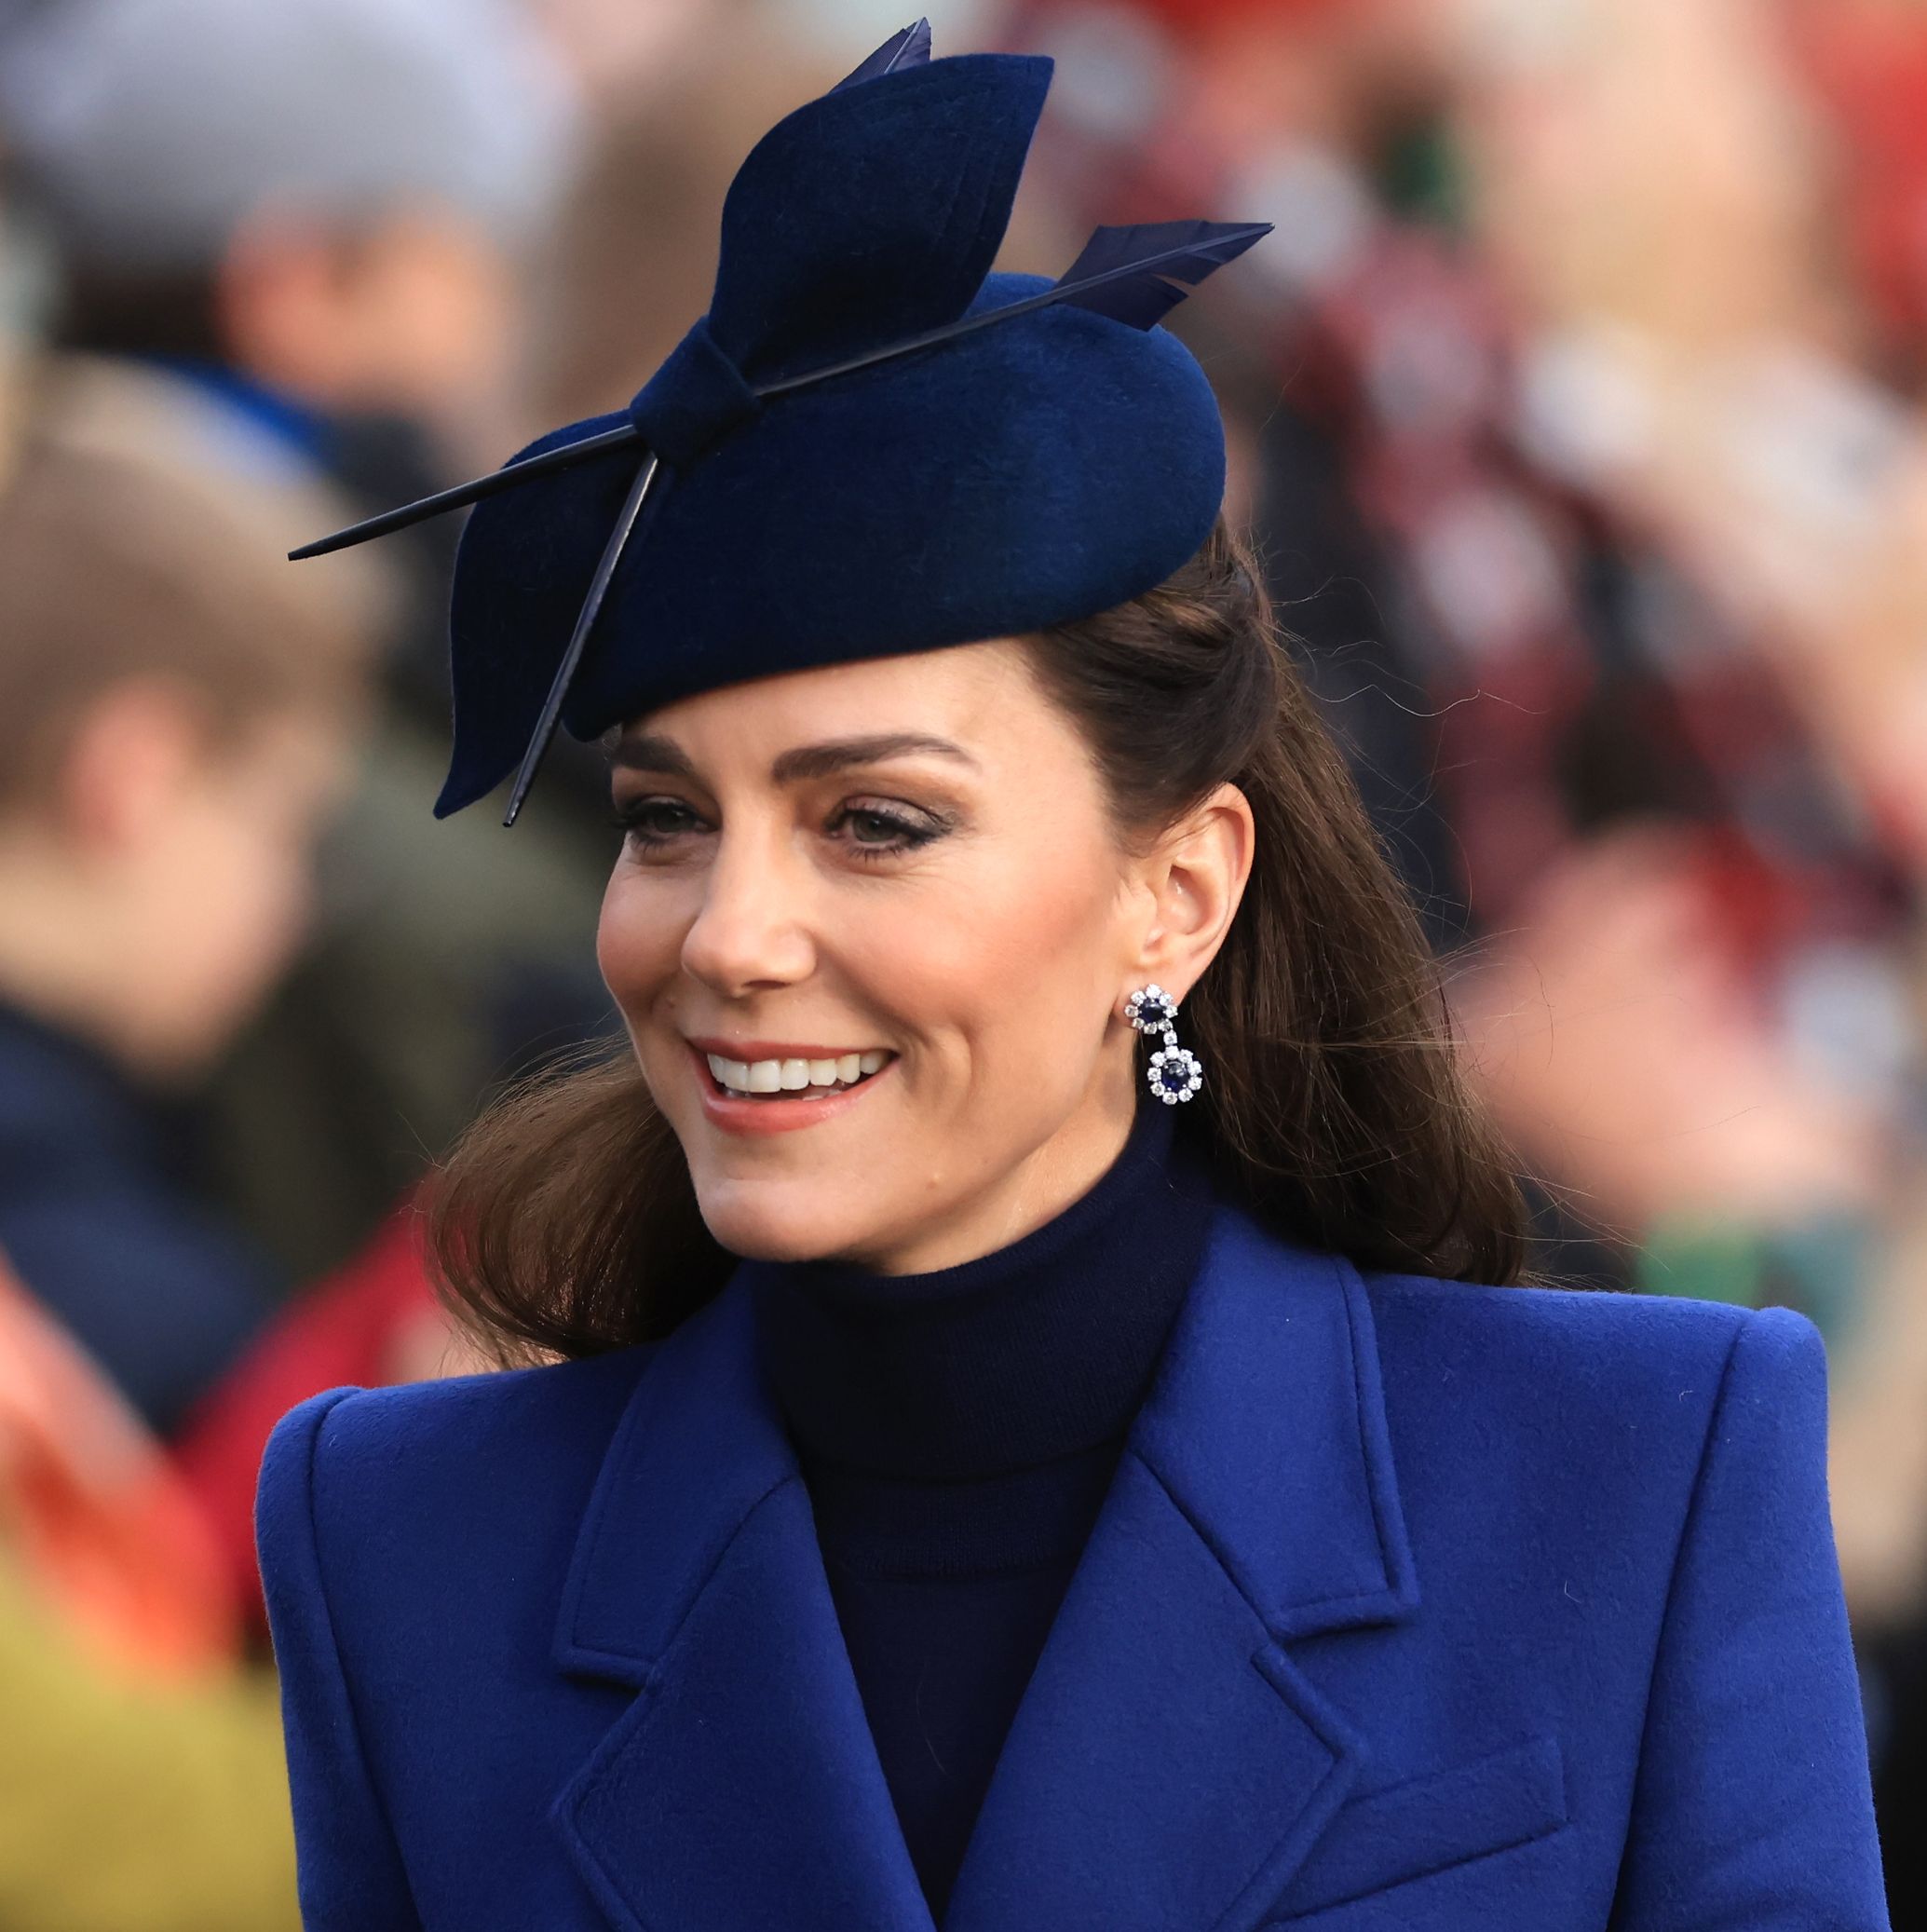 The Princess of Wales did a blue monochrome look this year at Sandringham.